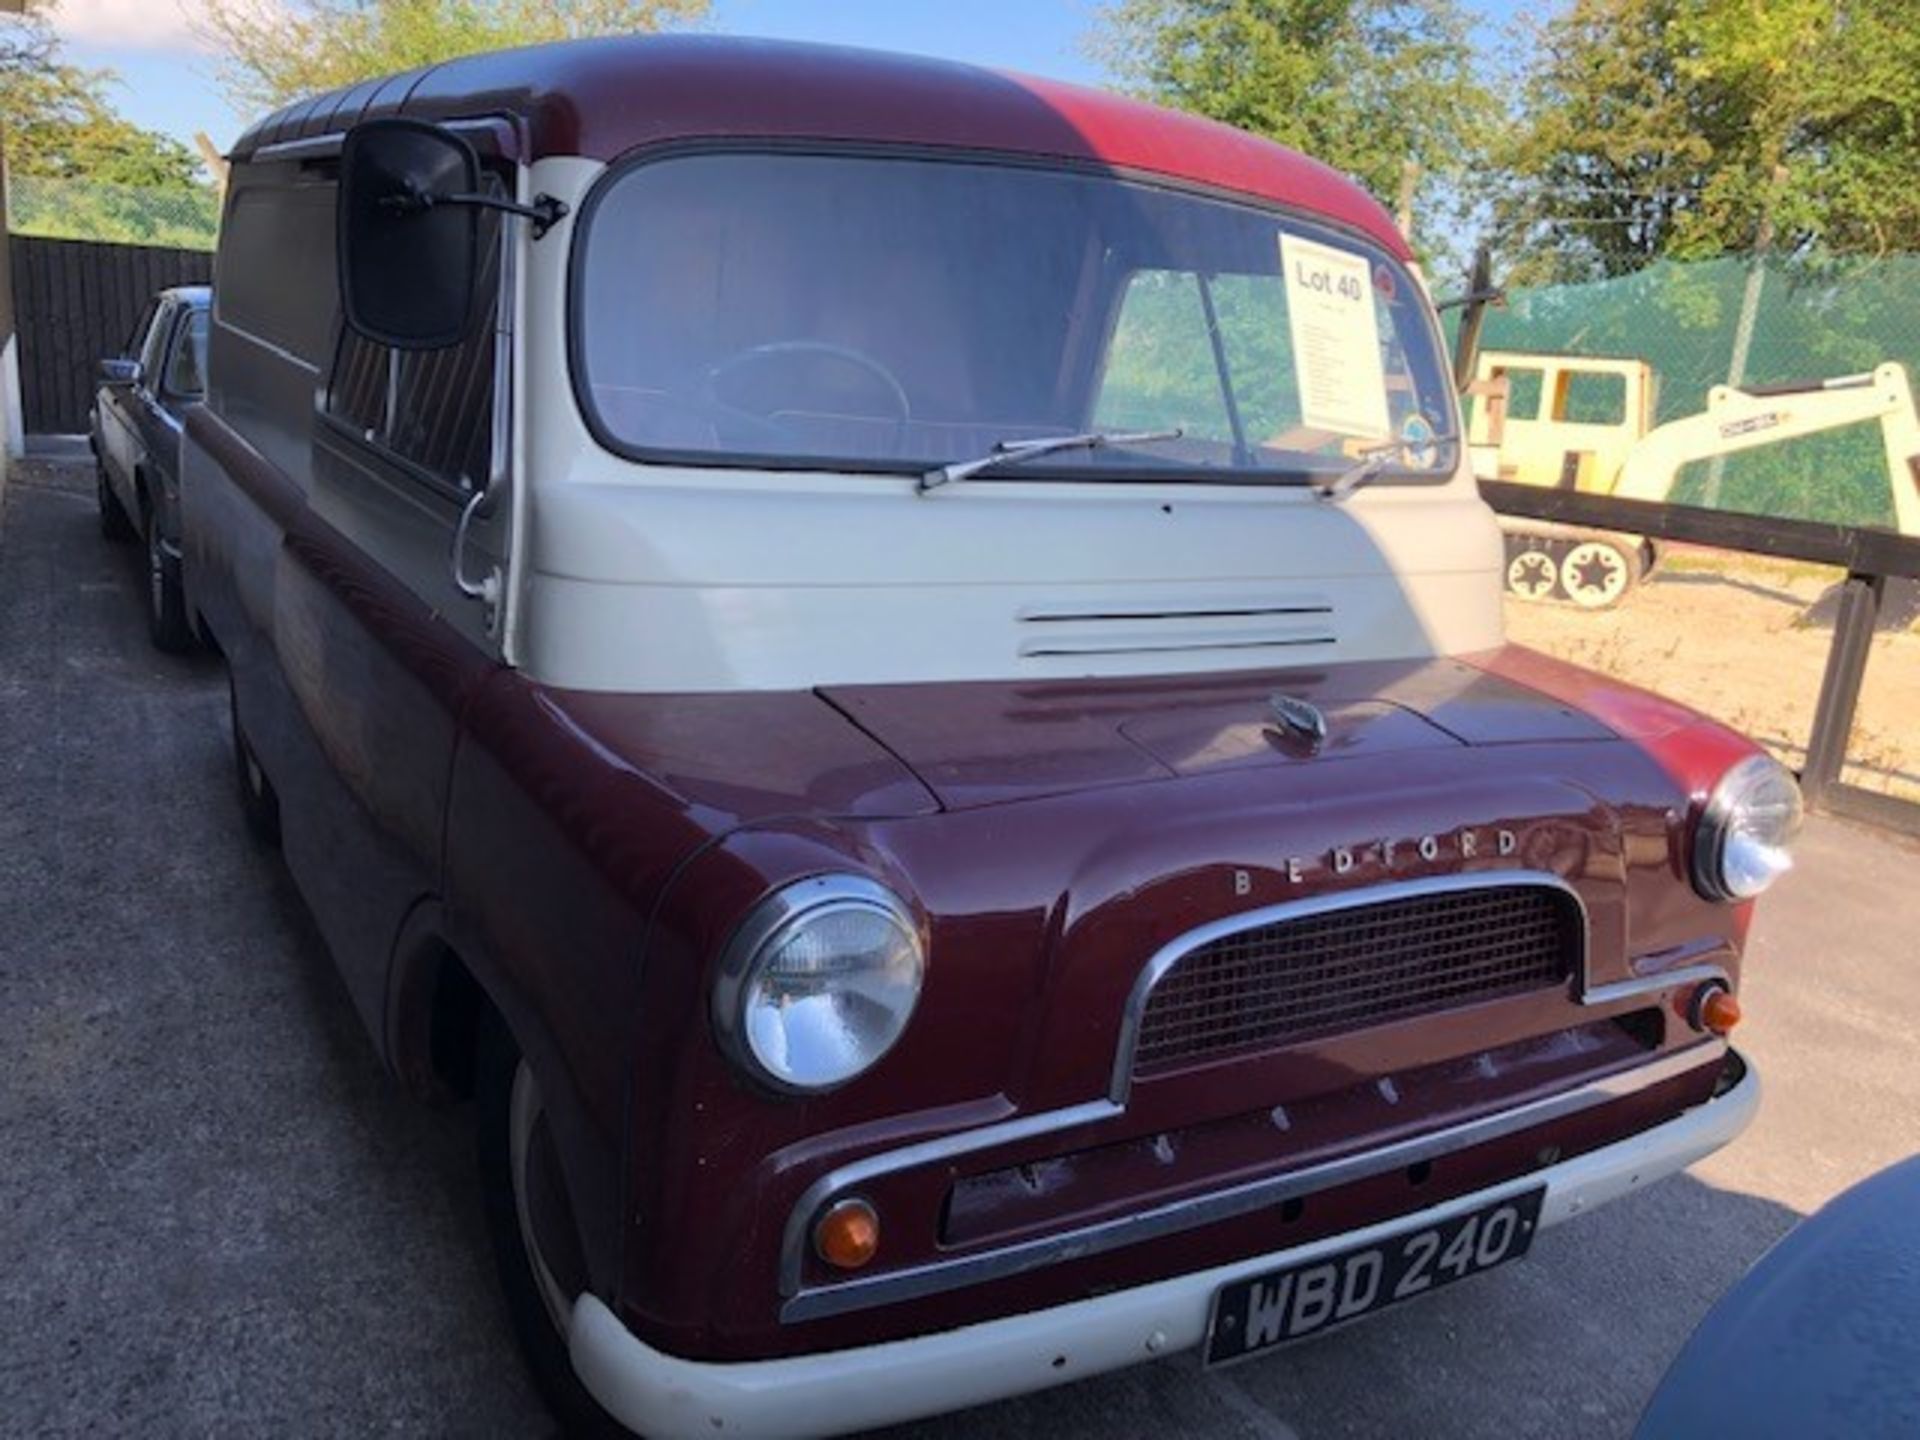 1960 Bedford CA Van Registration number WBD 240 Red and cream Long wheel base Bought & restored 12 - Image 18 of 20